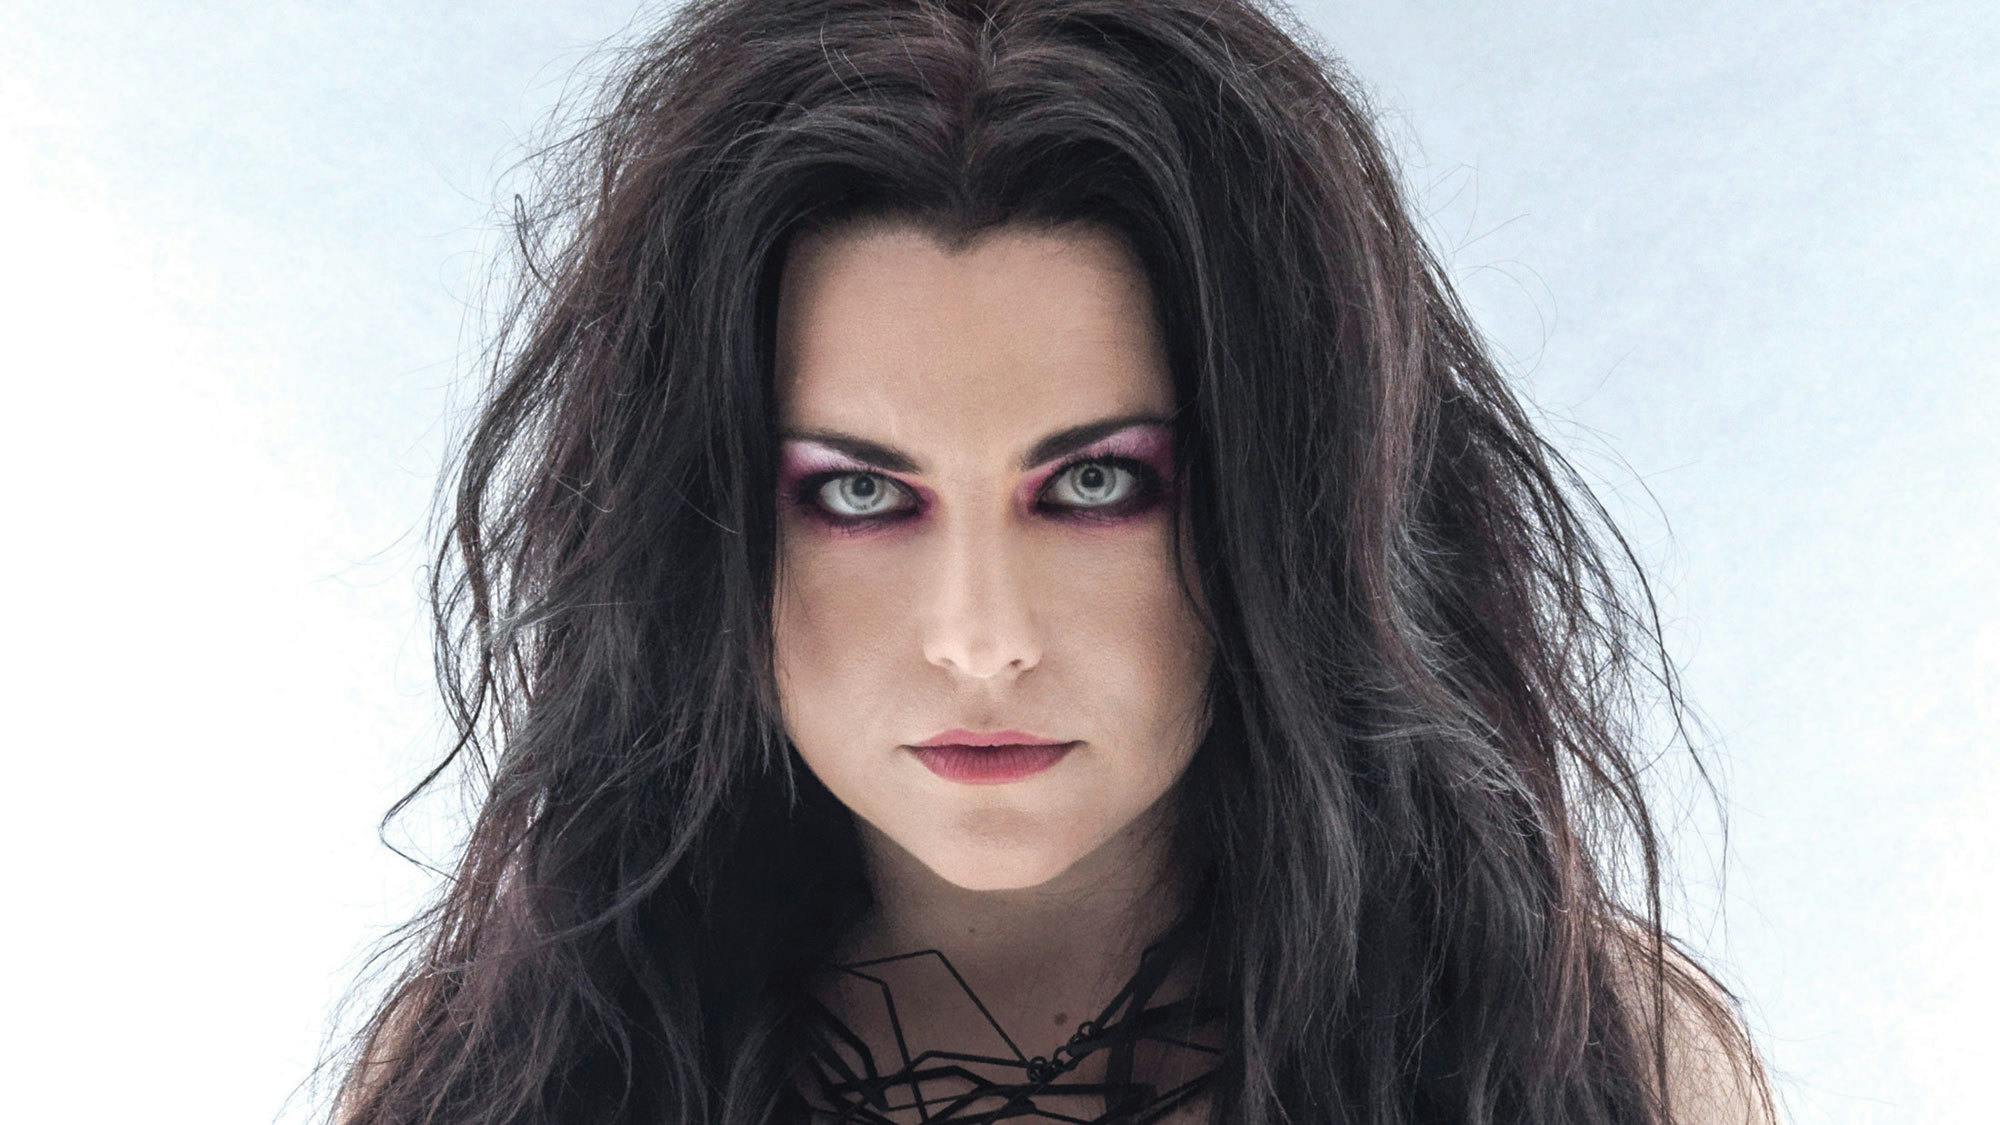 Amy Lee Posts Empowering Statement Addressing "The Lack Of Women In The Mainstream Rock World"